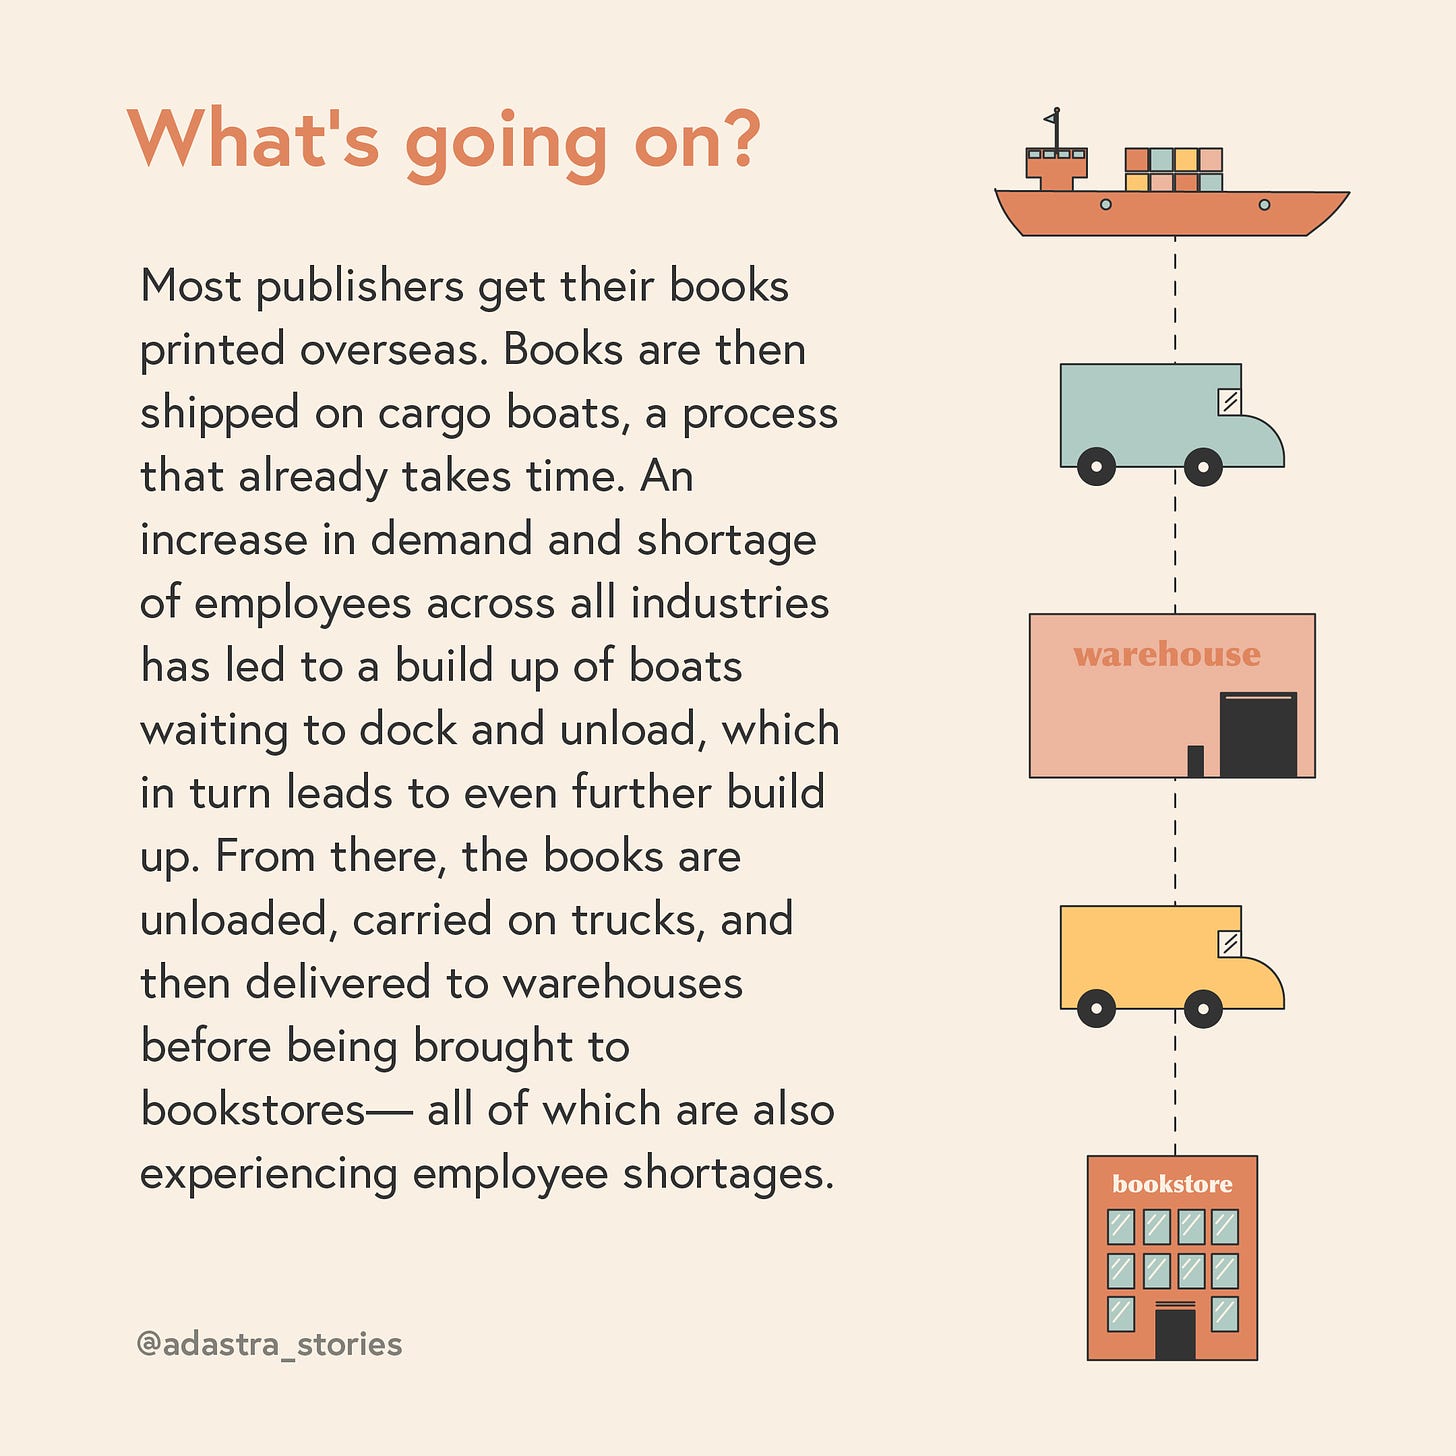 “What’s going on?” on top. A dotted line is drawn between a cargo boat, a truck, a warehouse, another truck, and a bookstore. Additional text reads: “Most publishers get their books printed overseas. Books are then shipped on cargo boats, a process that already takes time. An increase in demand and shortage of employees across all industries has led to a build up of boats waiting to dock and unload, which in turn leads to even further build up. From there, the books are unloaded, carried on trucks, and then delivered to warehouses before being brought to bookstores—all of which are also experiencing employee shortages.”